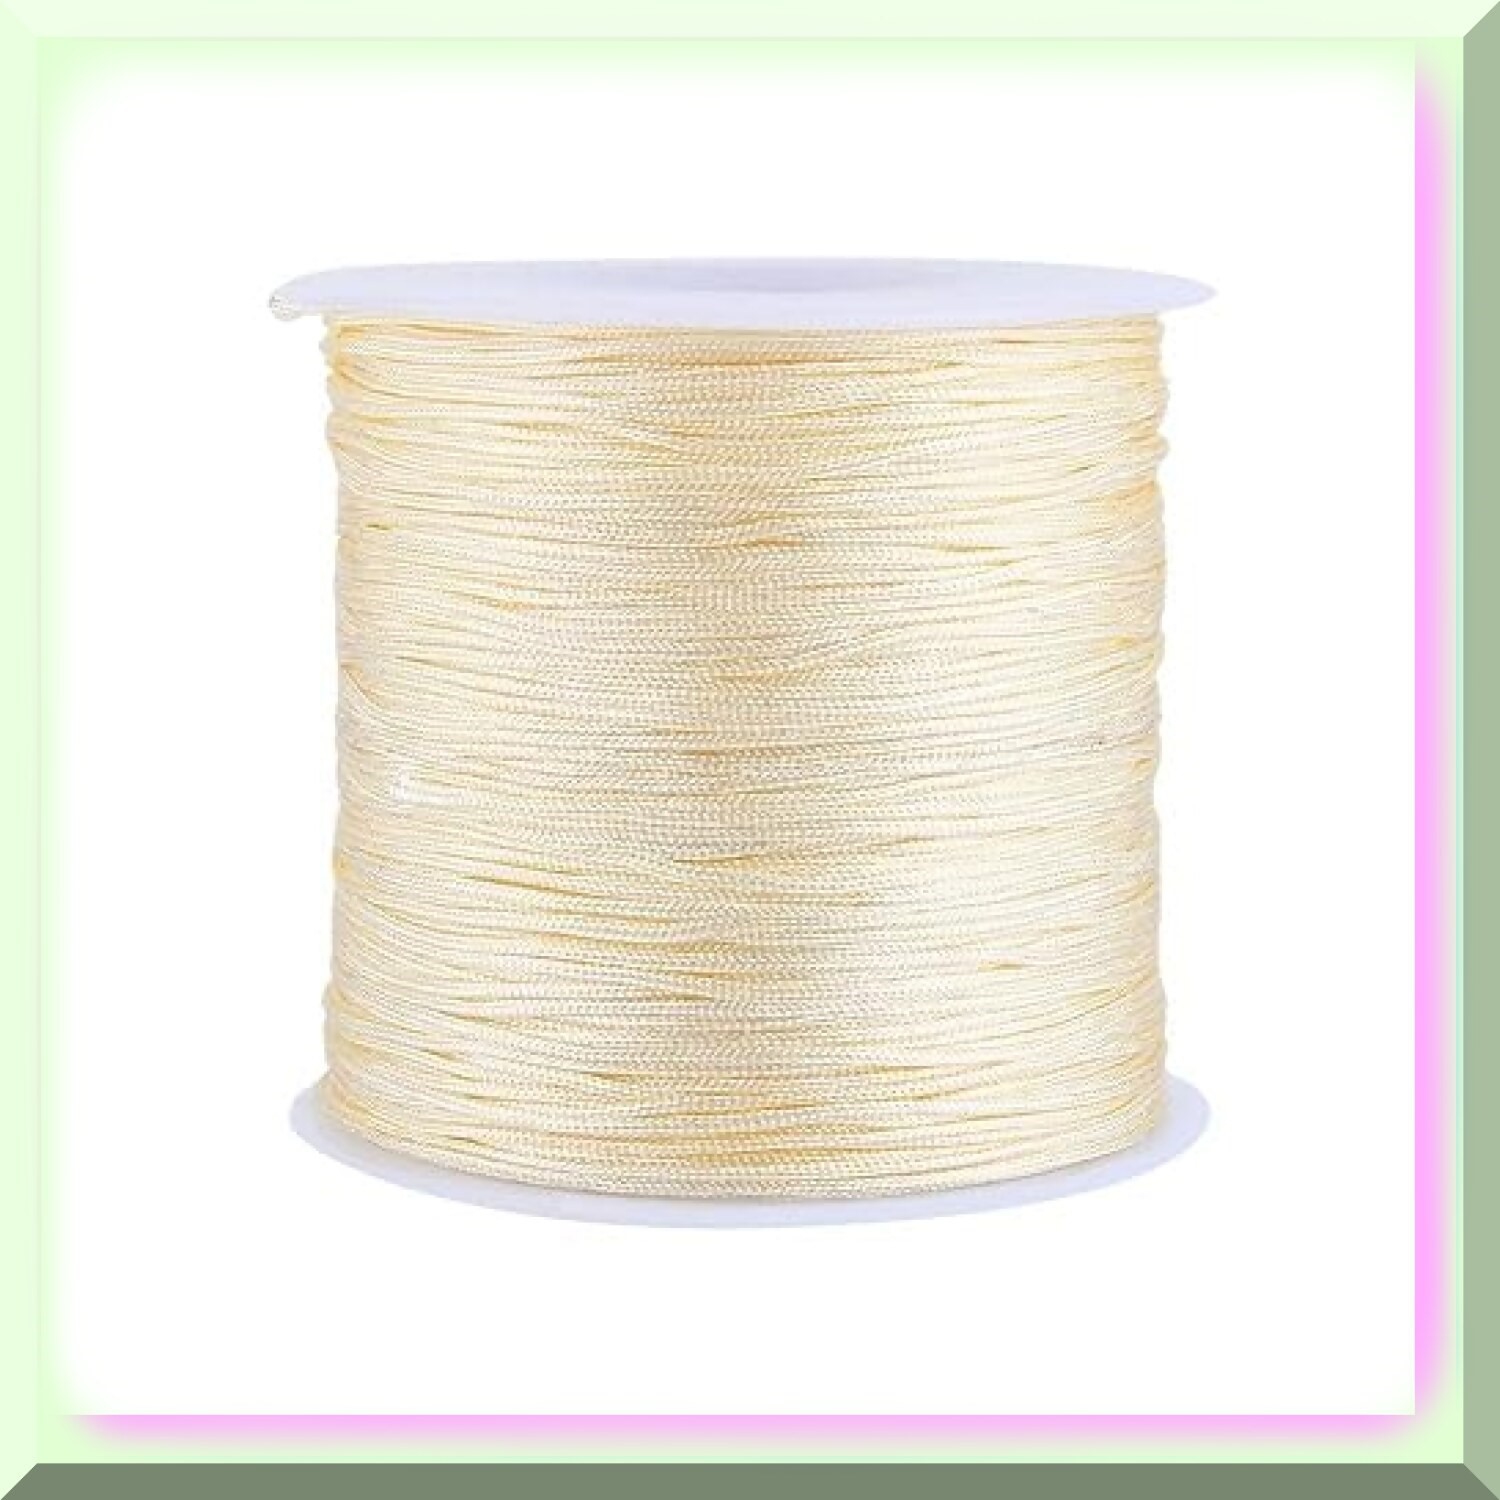 100M x 0.8mm Beige Nylon Beading String Cord - High-Quality Rattail Macrame  Thread for DIY Jewellery, Chinese Knot Making, Window Blinds